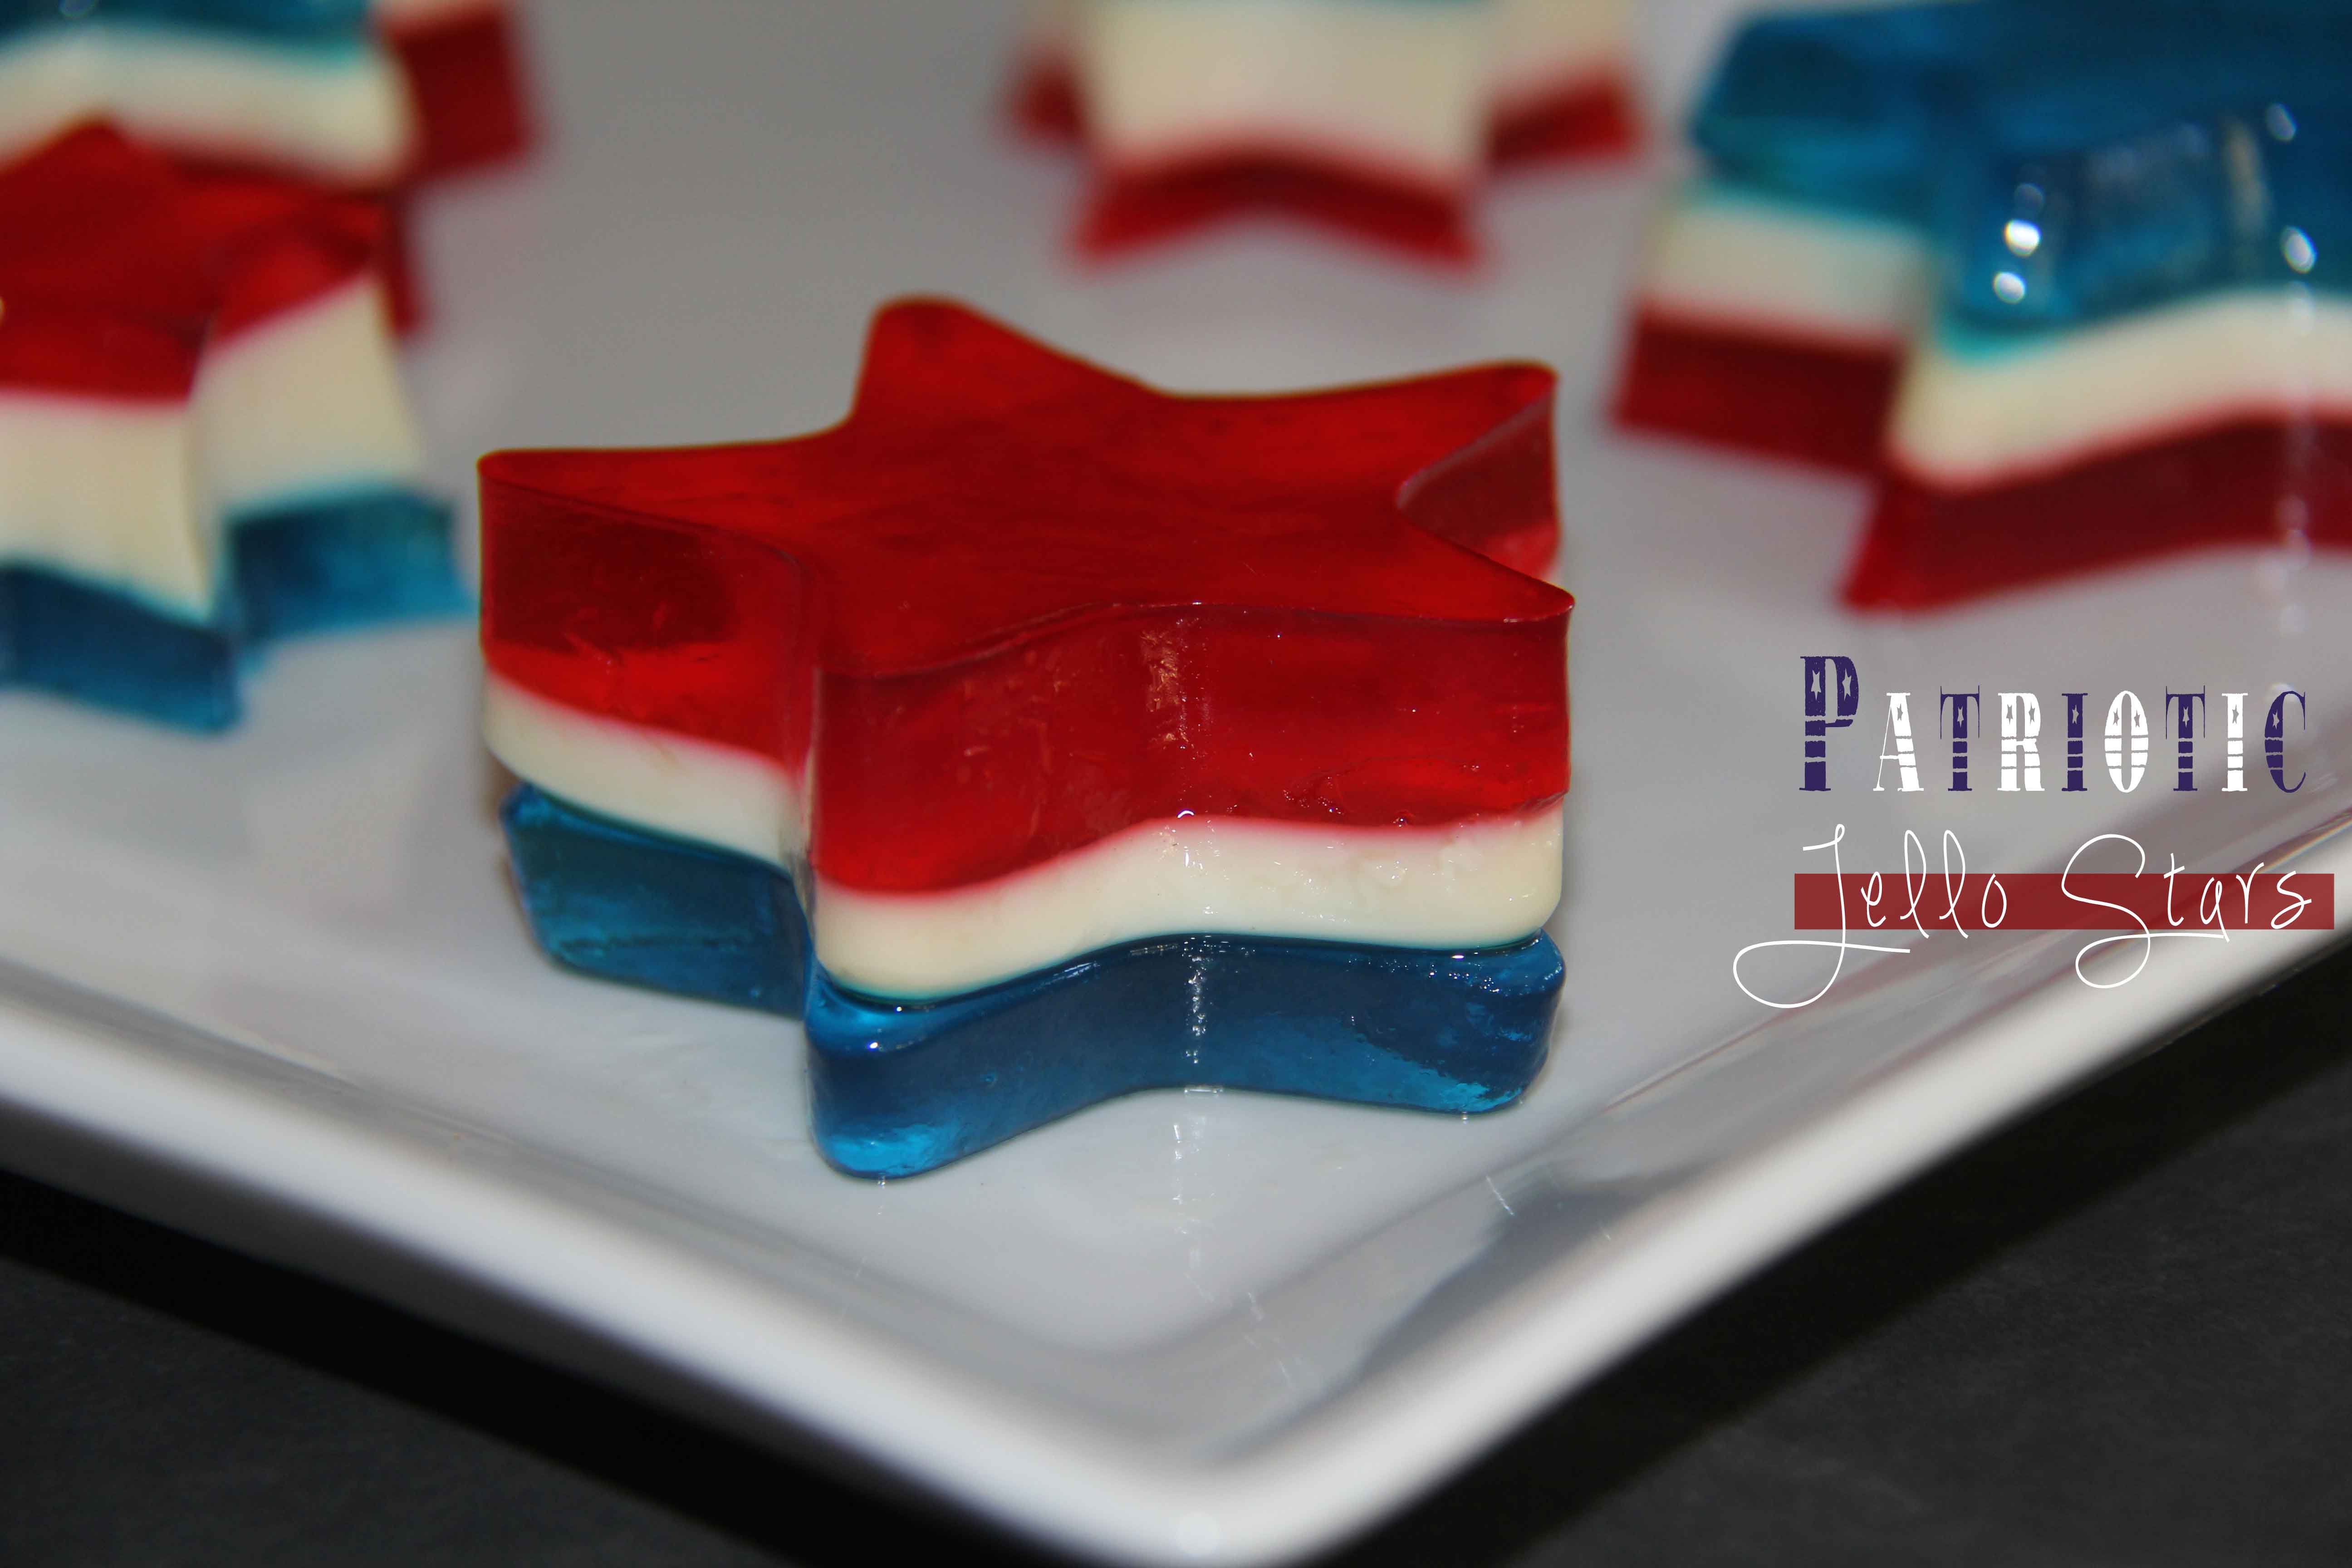 Patriotic Jello Stars - Reviewed and tested by one of the 3 crazy sisters at  https://www.thisgrandmaisfun.com